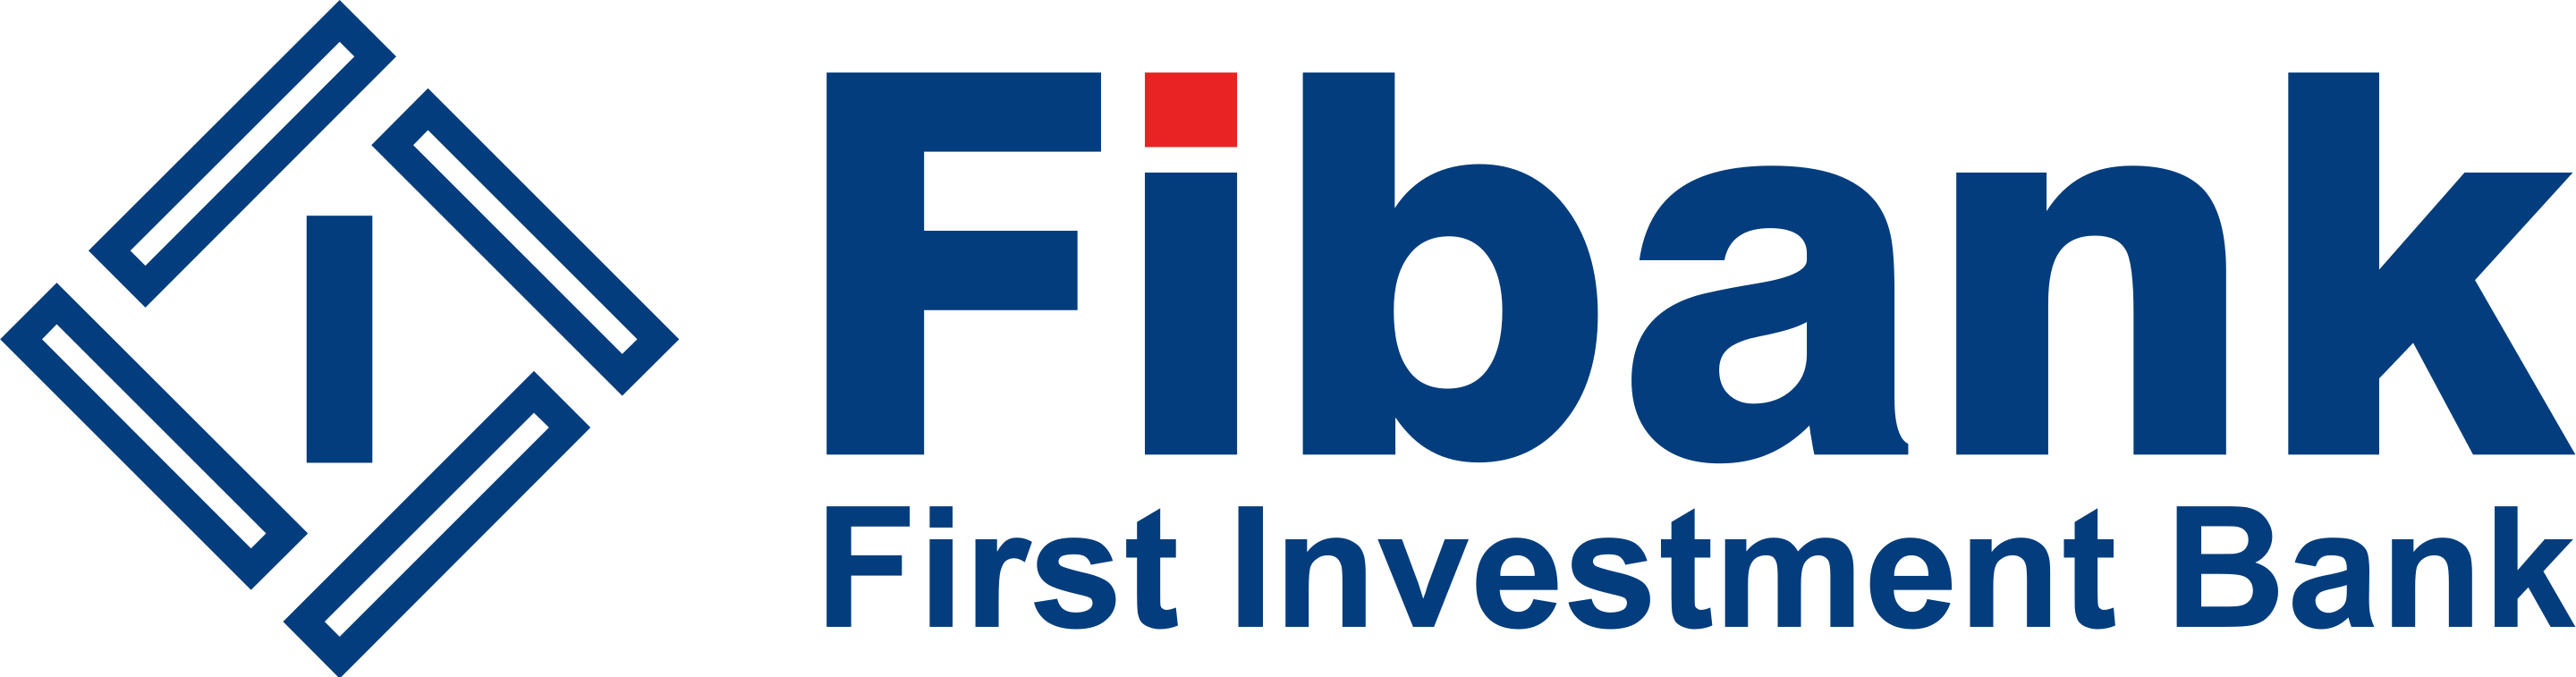 First Investment Bank